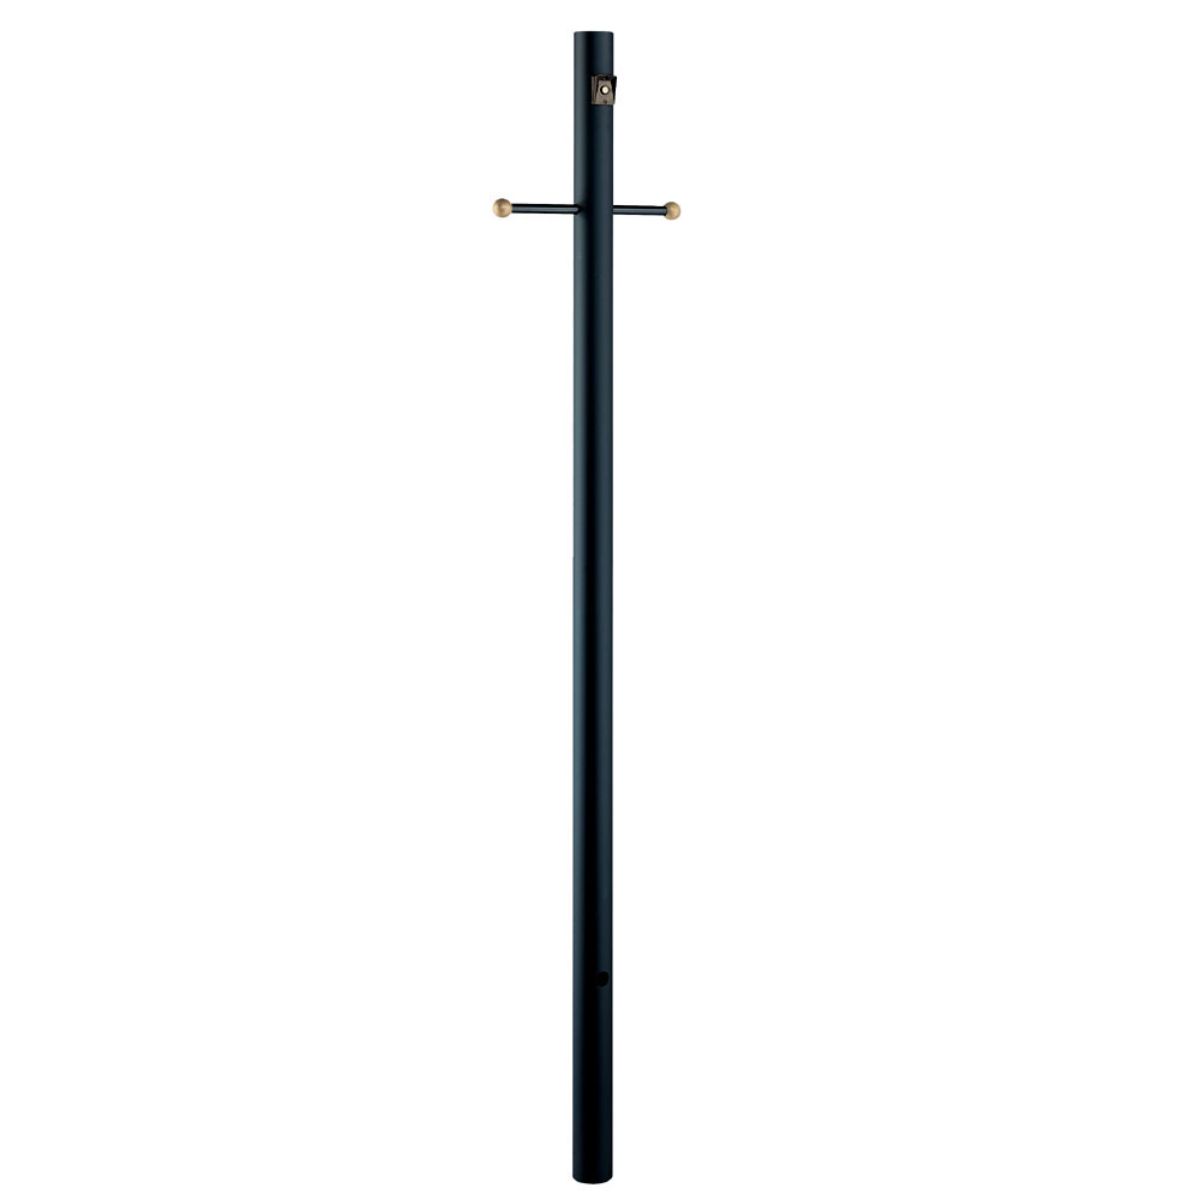 7 Ft Round Aluminum Direct Burial Pole with Photocell and Ladder Rest3 In. Shaft Matte Black Finish - Bees Lighting